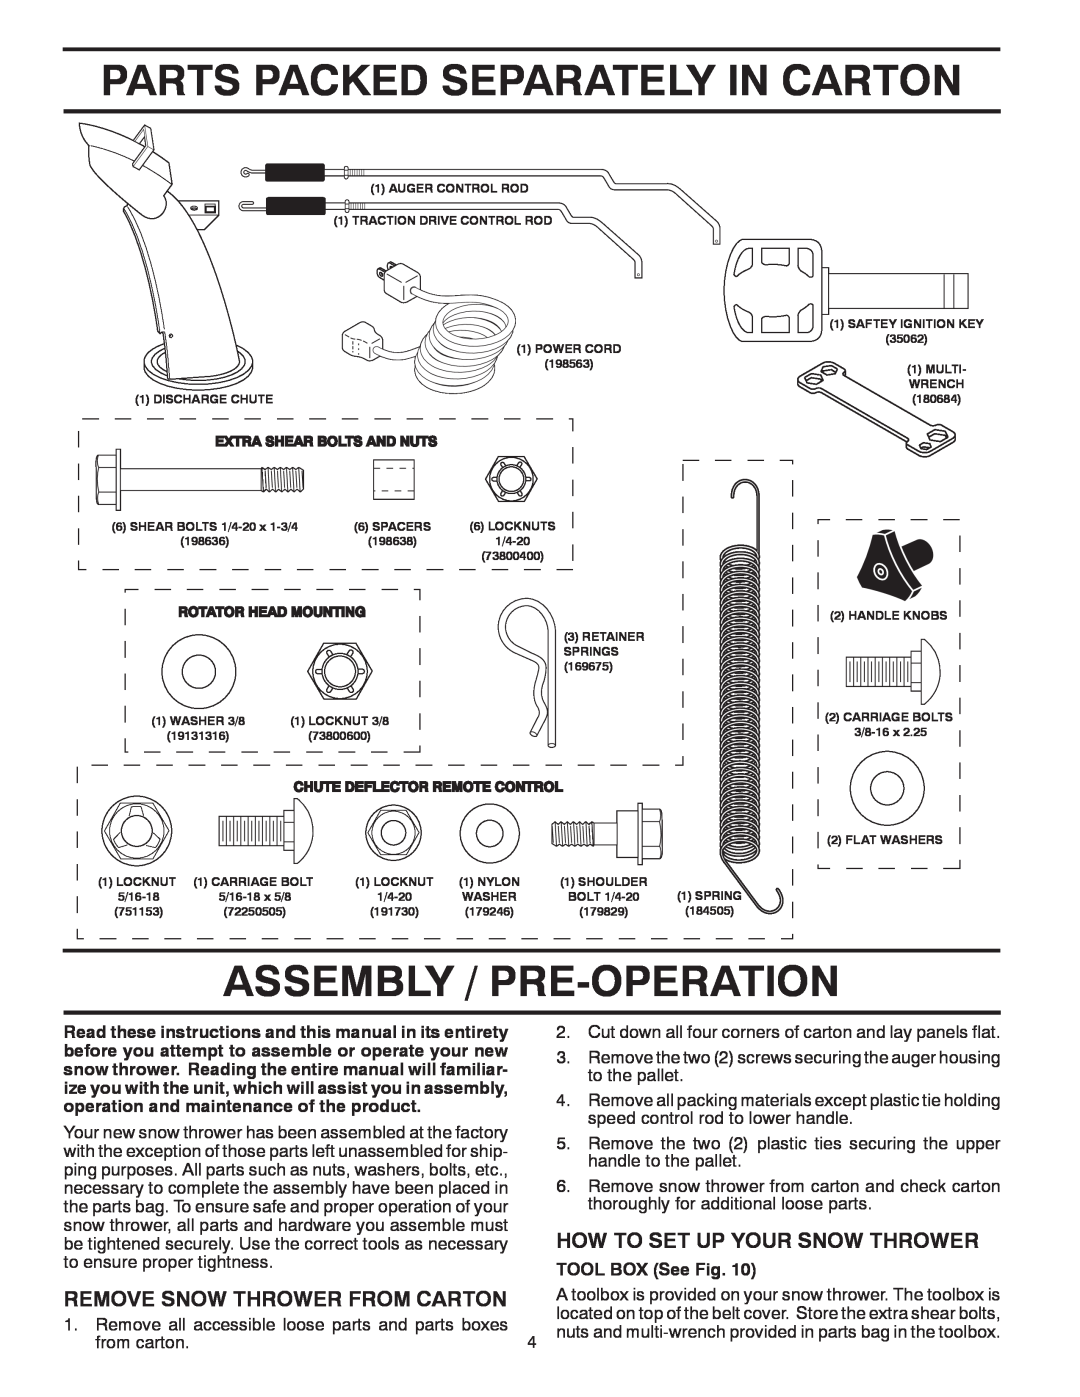 Husqvarna 1130SB owner manual Parts Packed Separately In Carton, Assembly / Pre-Operation, How To Set Up Your Snow Thrower 